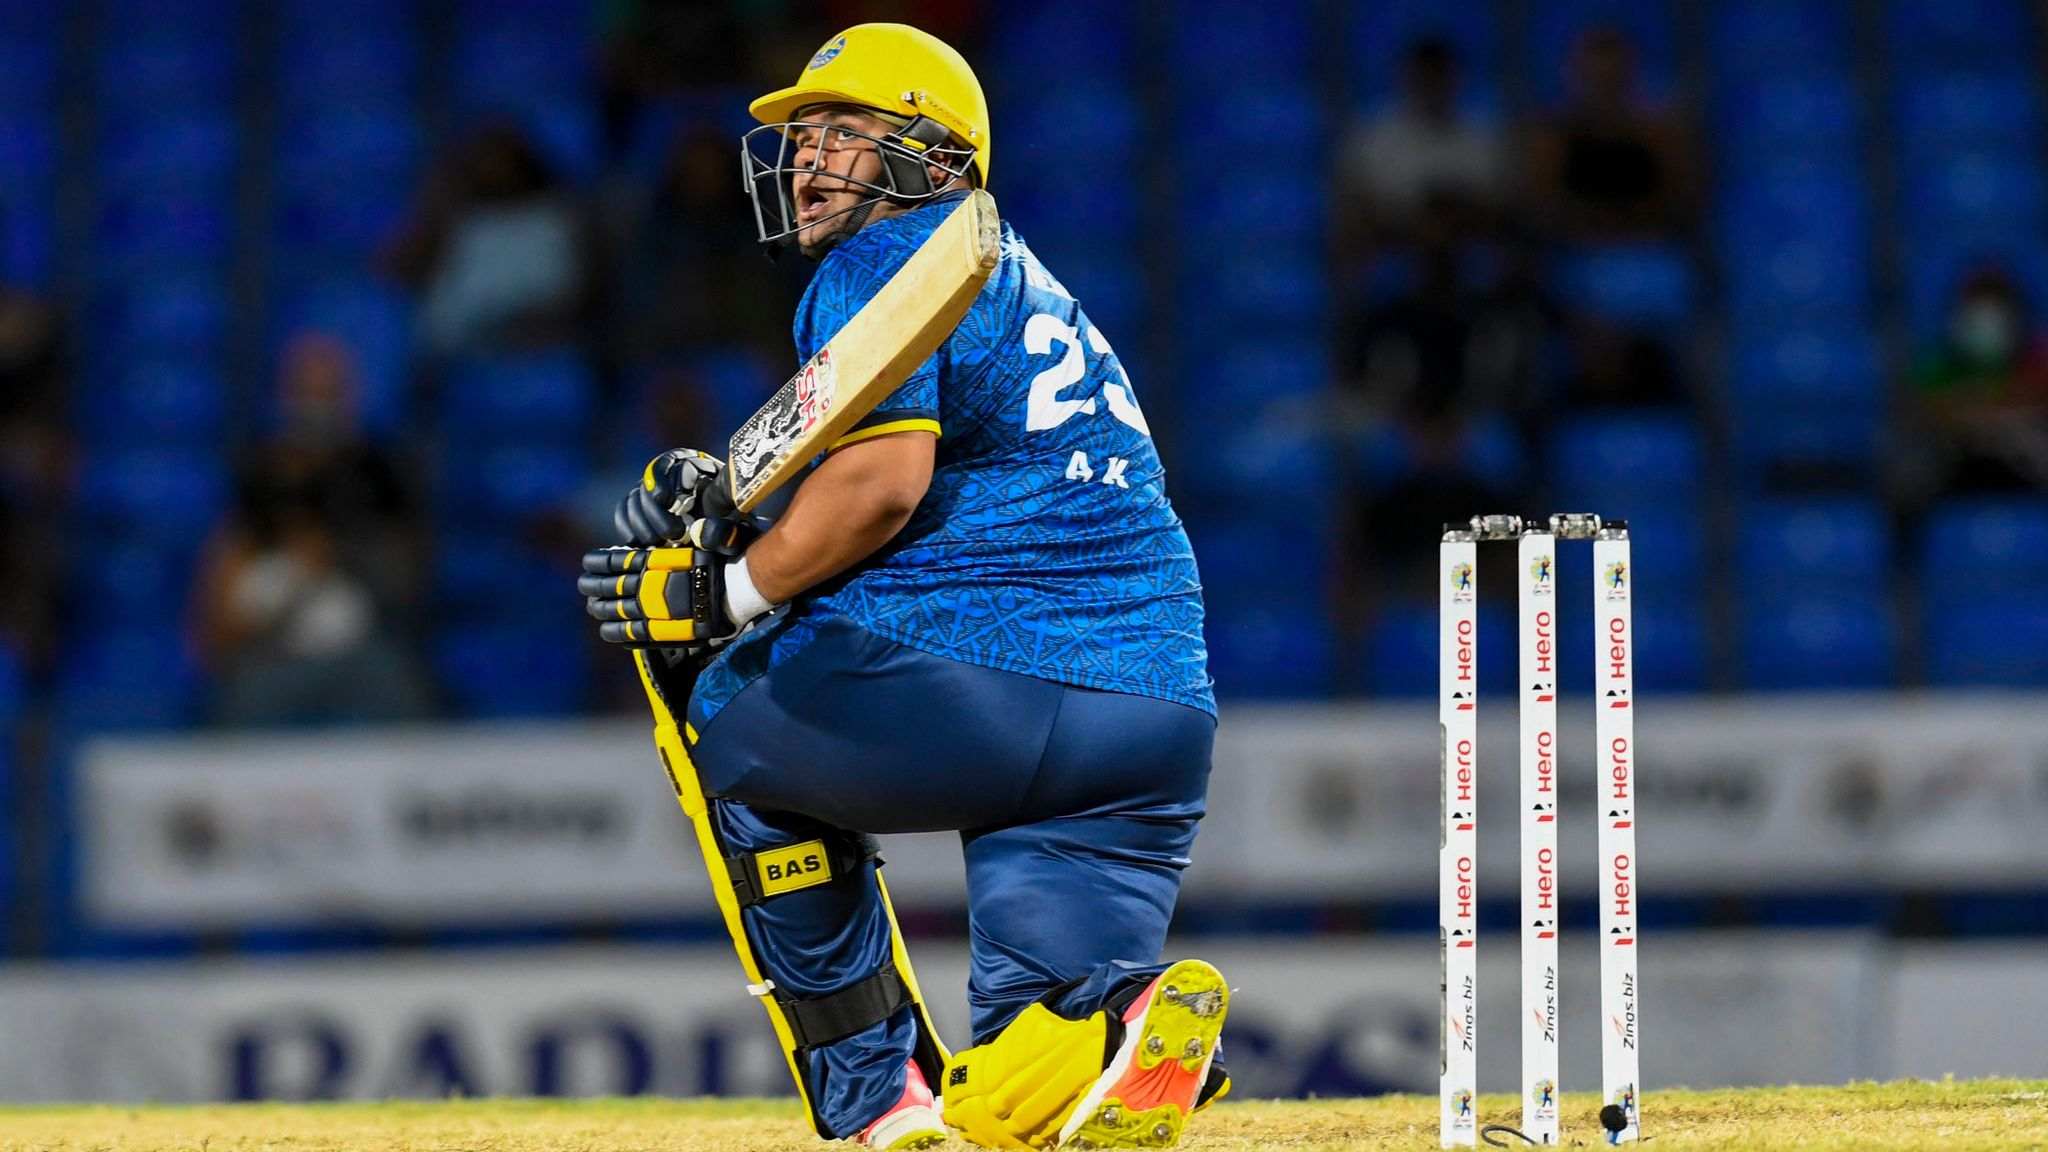 CPL 2021 Preview: Depleted Barbados Royals seek redemption against in-form Jamaica Tallawahs 